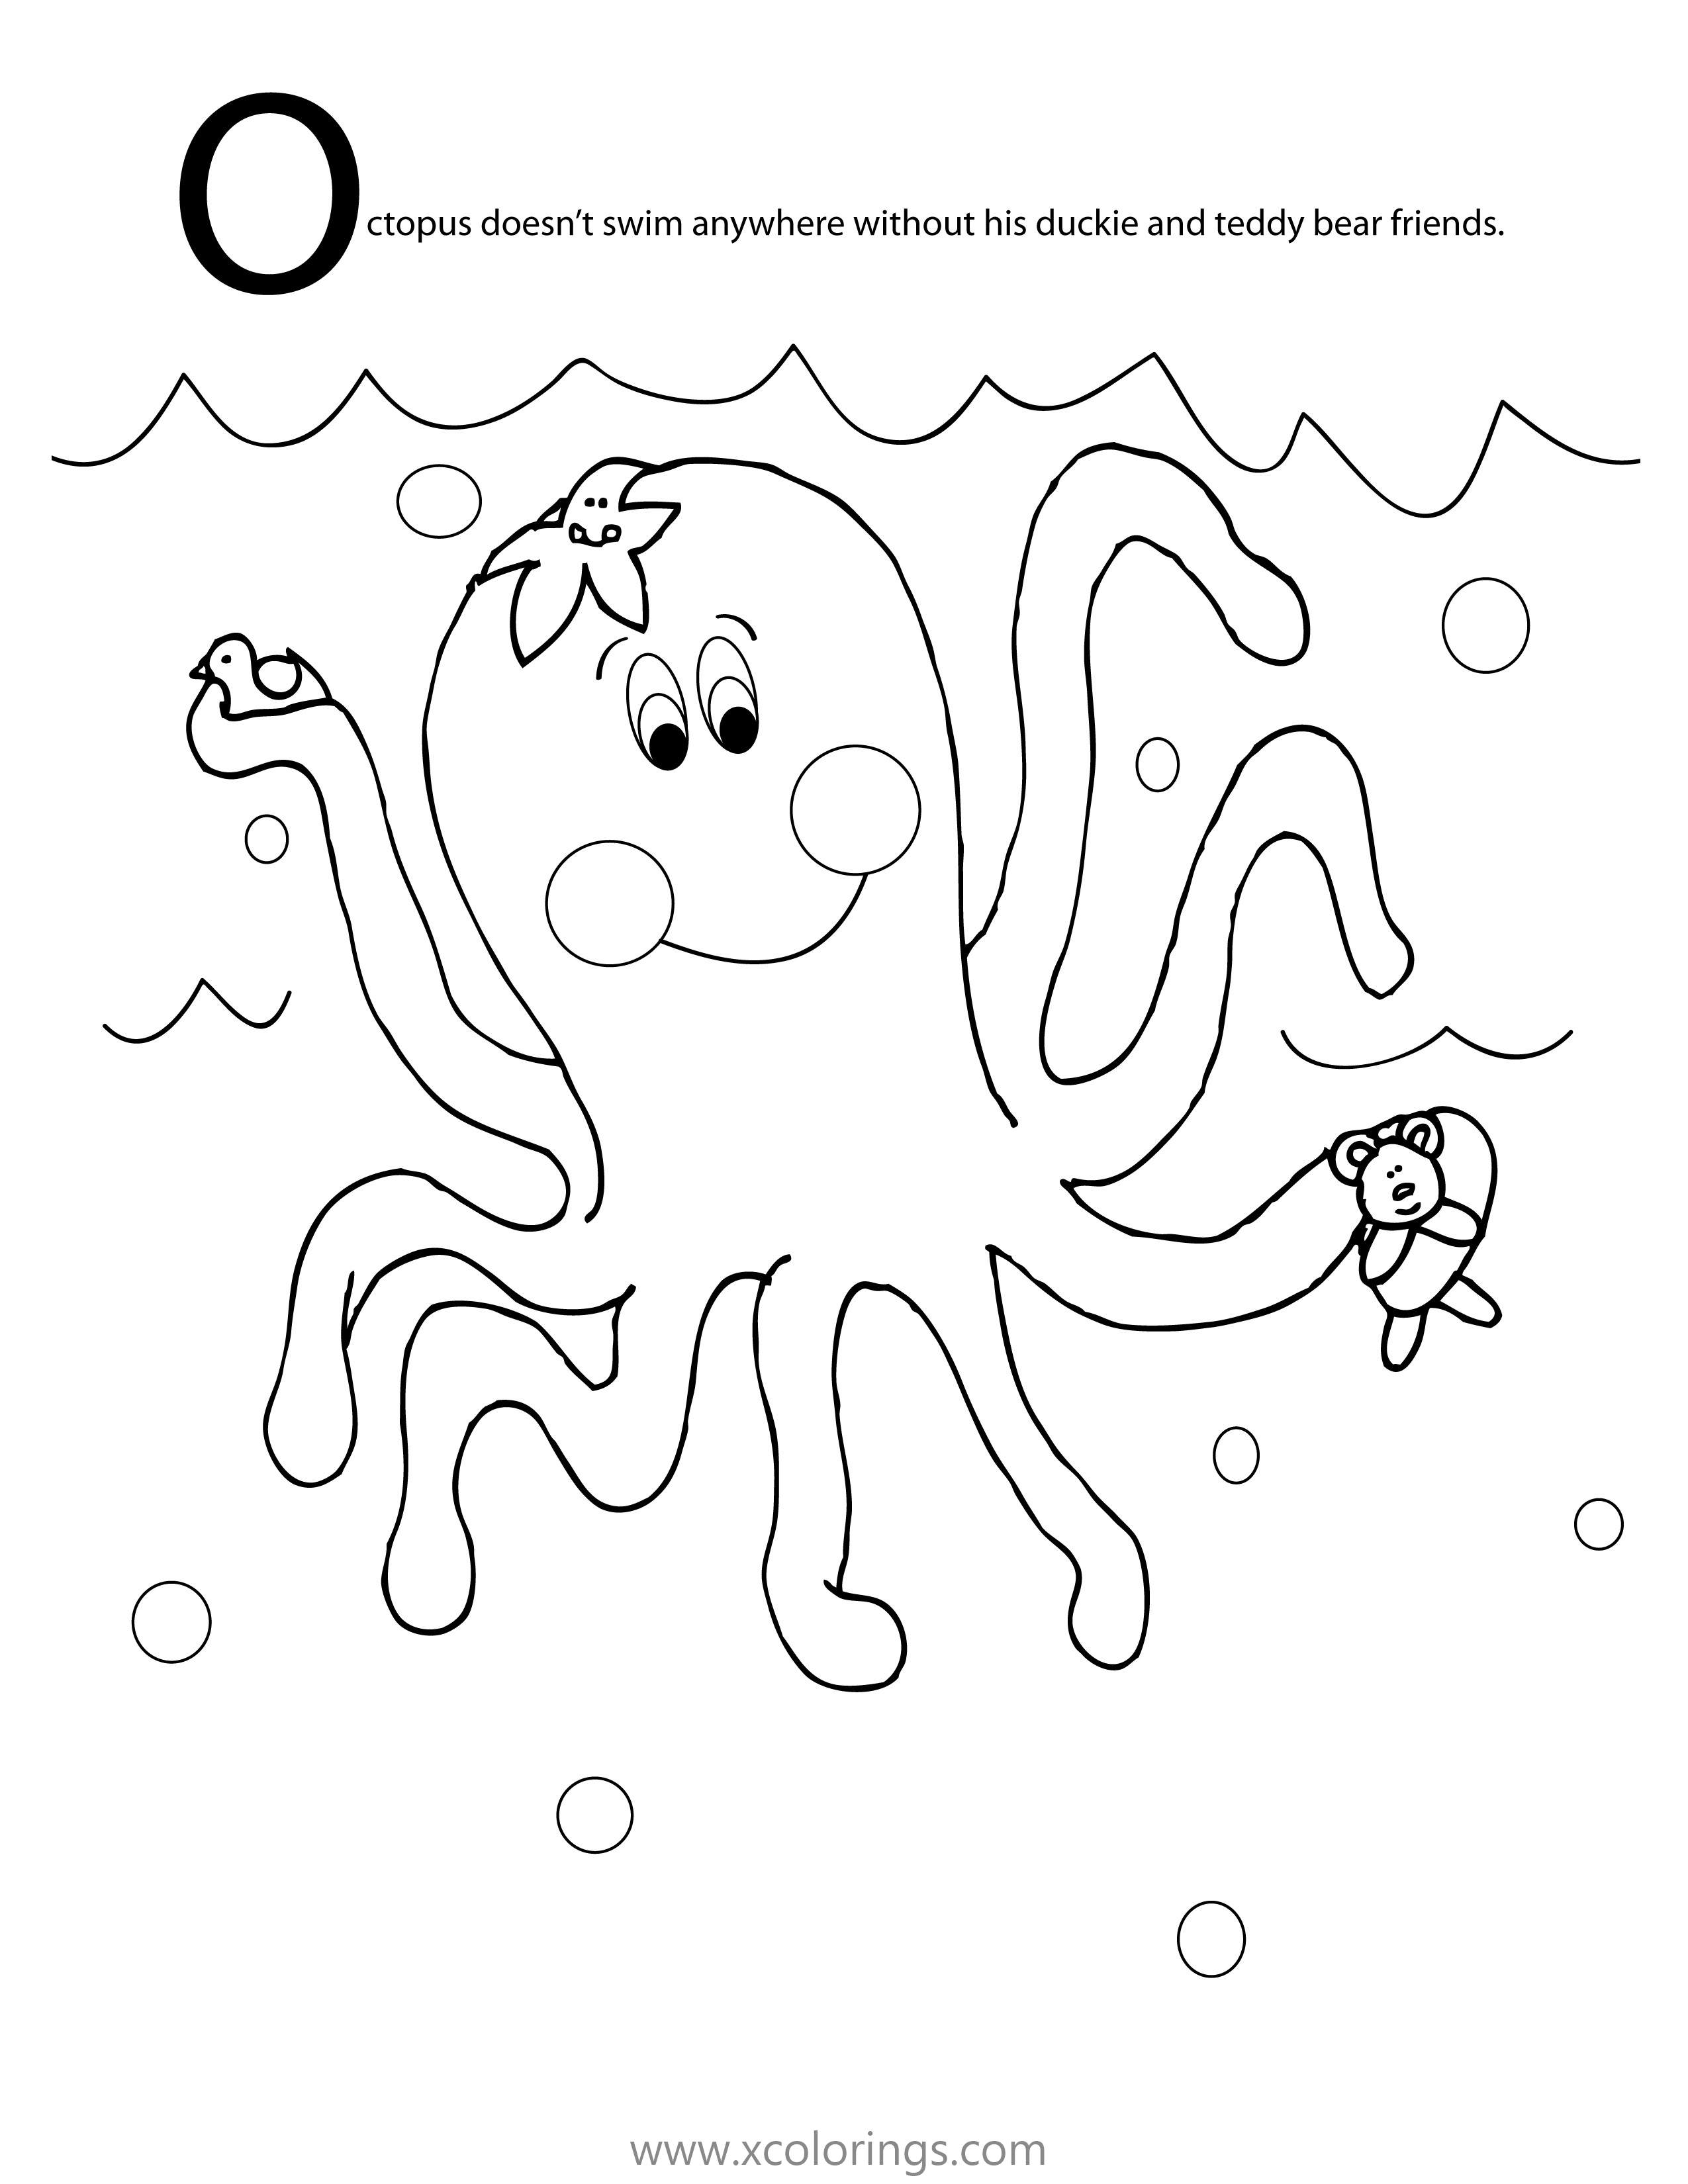 Free Animal Alphabet Letter O for Octopus Coloring Pages printable